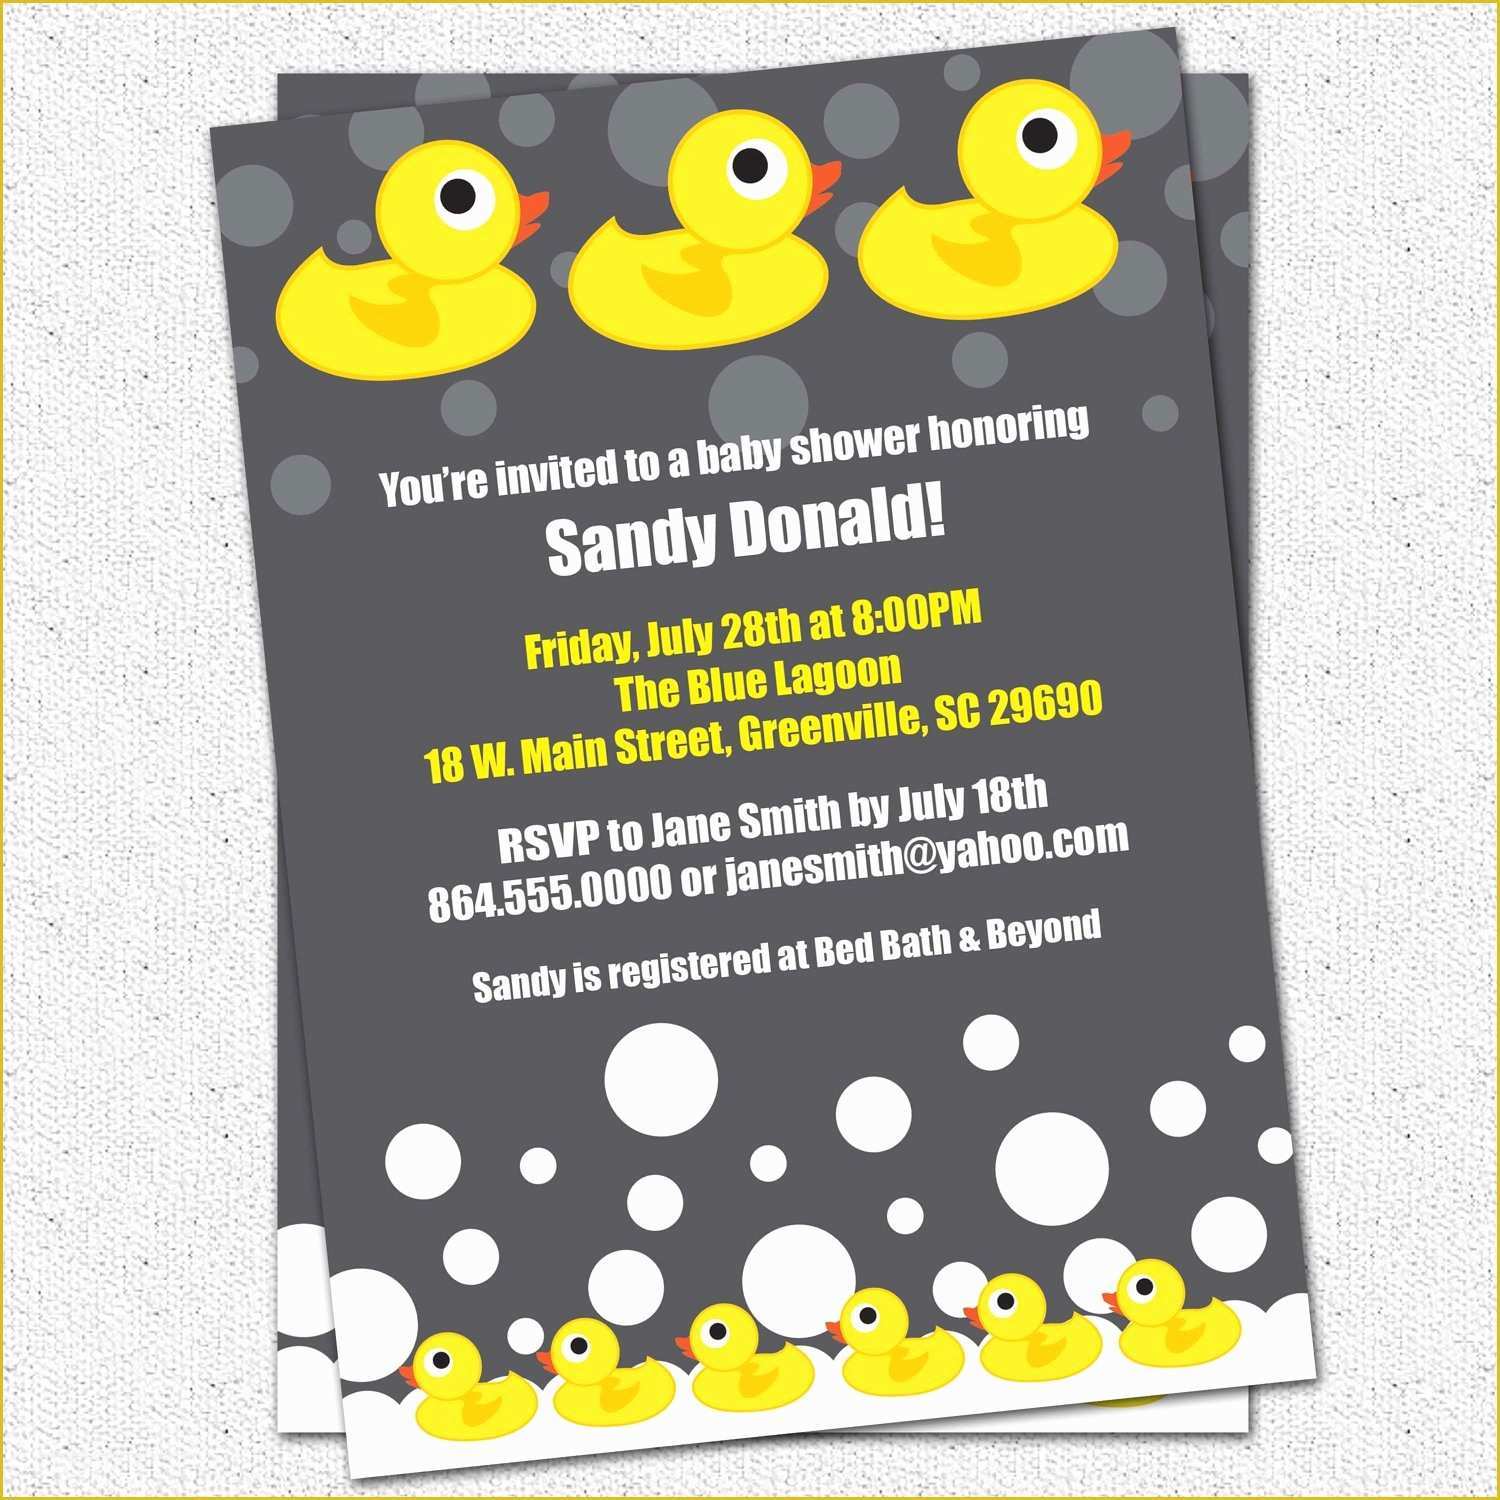 Rubber Ducky Baby Shower Invitations Template Free Of Baby Shower Invitation Printable Rubber Duck Ducky Duckie